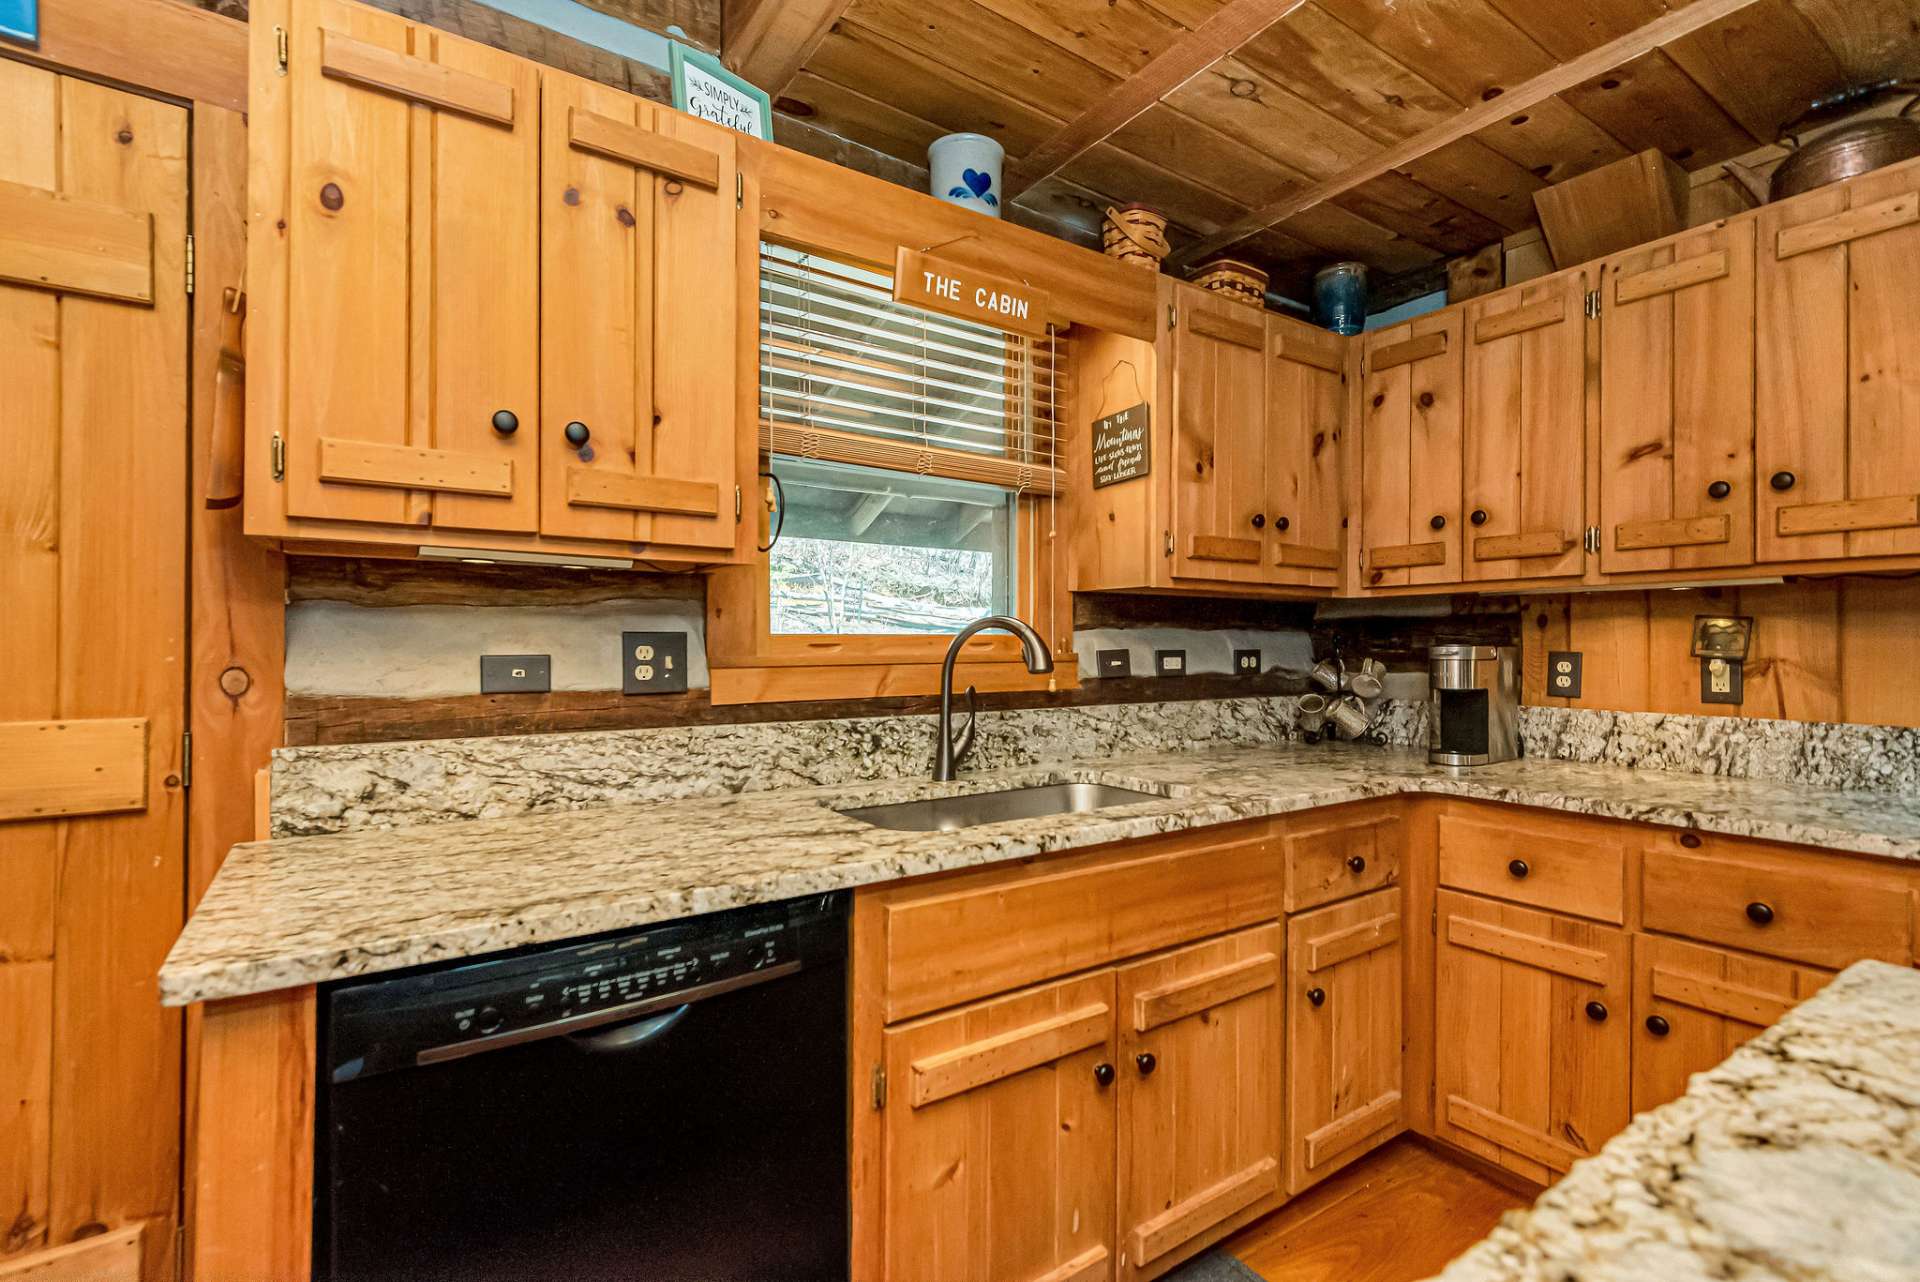 The kitchen showcases granite countertops complementing the hand-crafted wood cabinets, and stainless steel appliances.